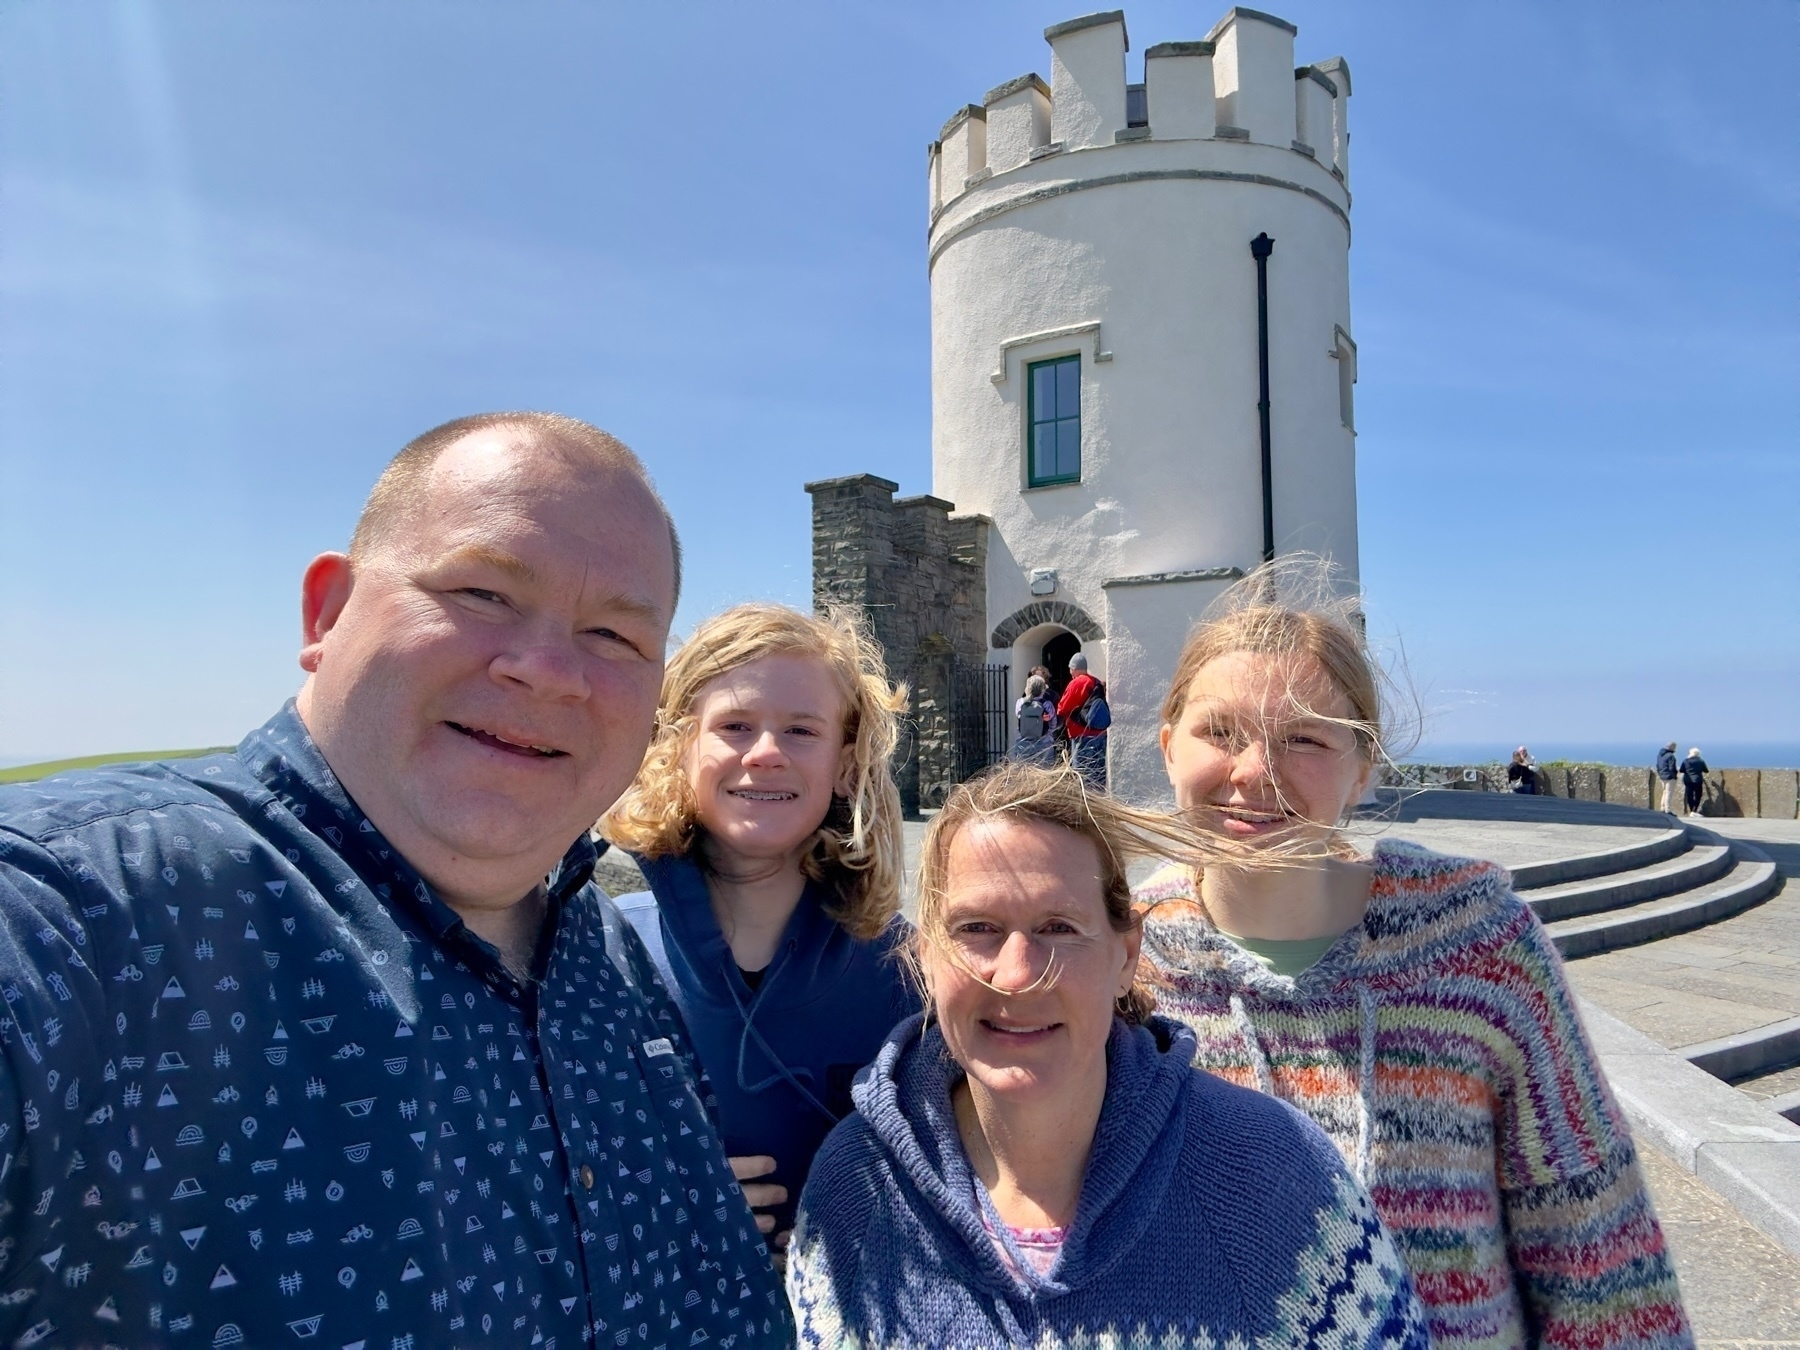 Auto-generated description: A family of four stands smiling in front of a circular stone tower on a sunny day.